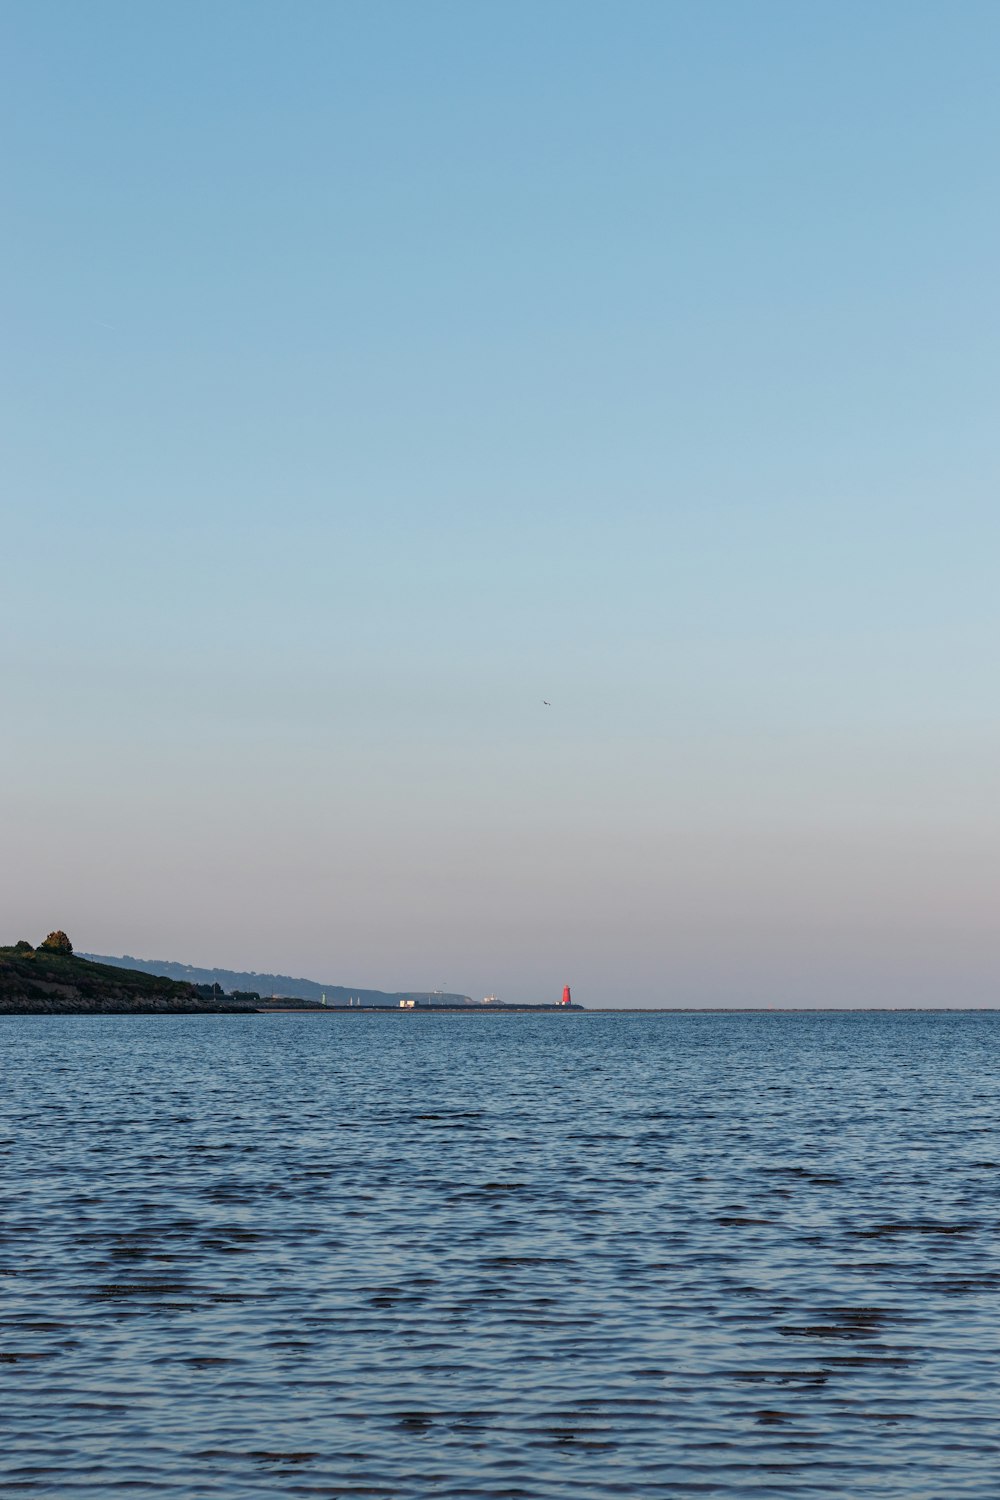 a large body of water with a lighthouse in the distance